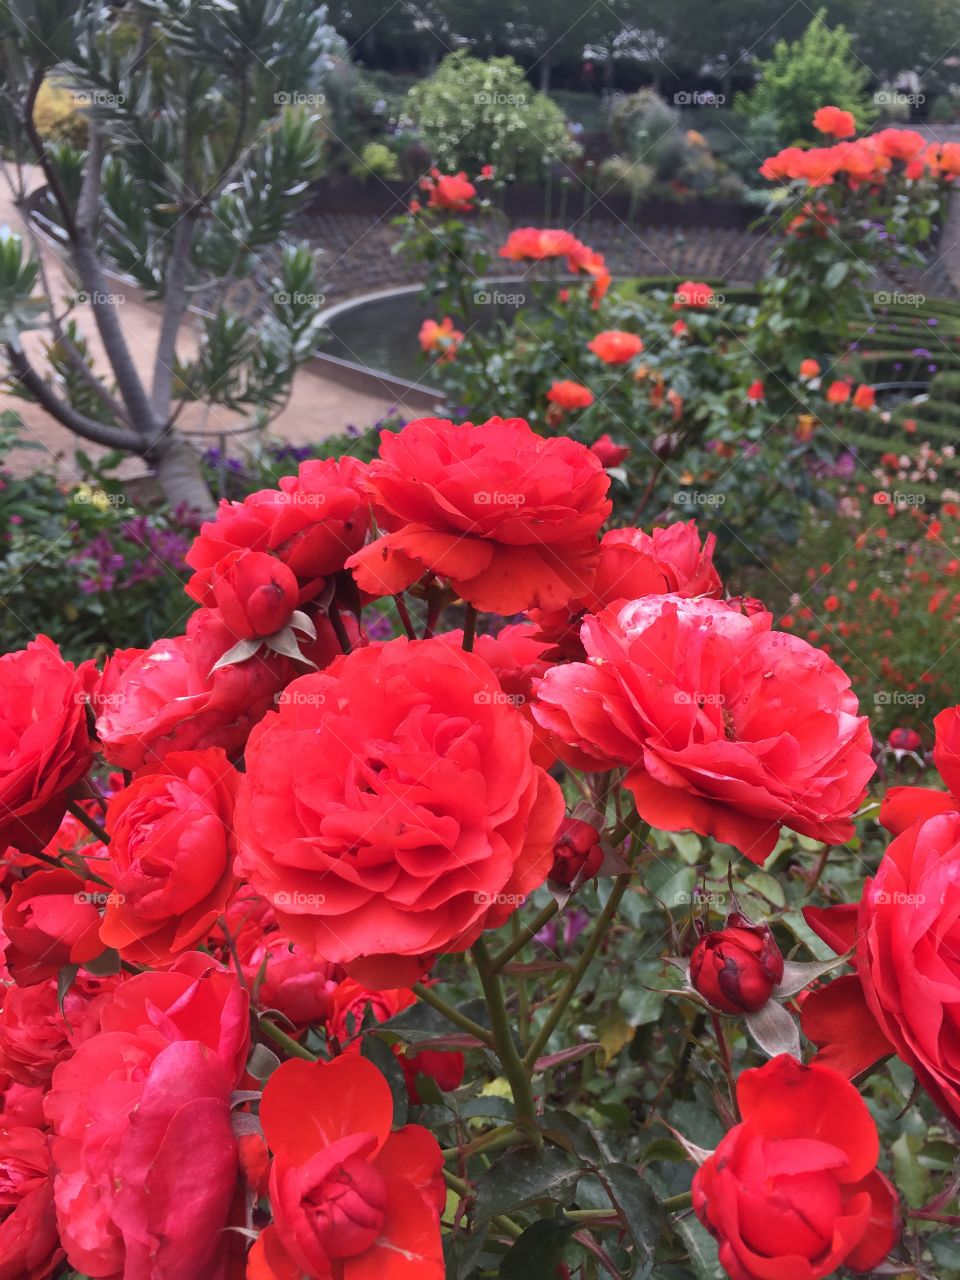 Red roses in garden. Bunches of rose bushes altogether. 